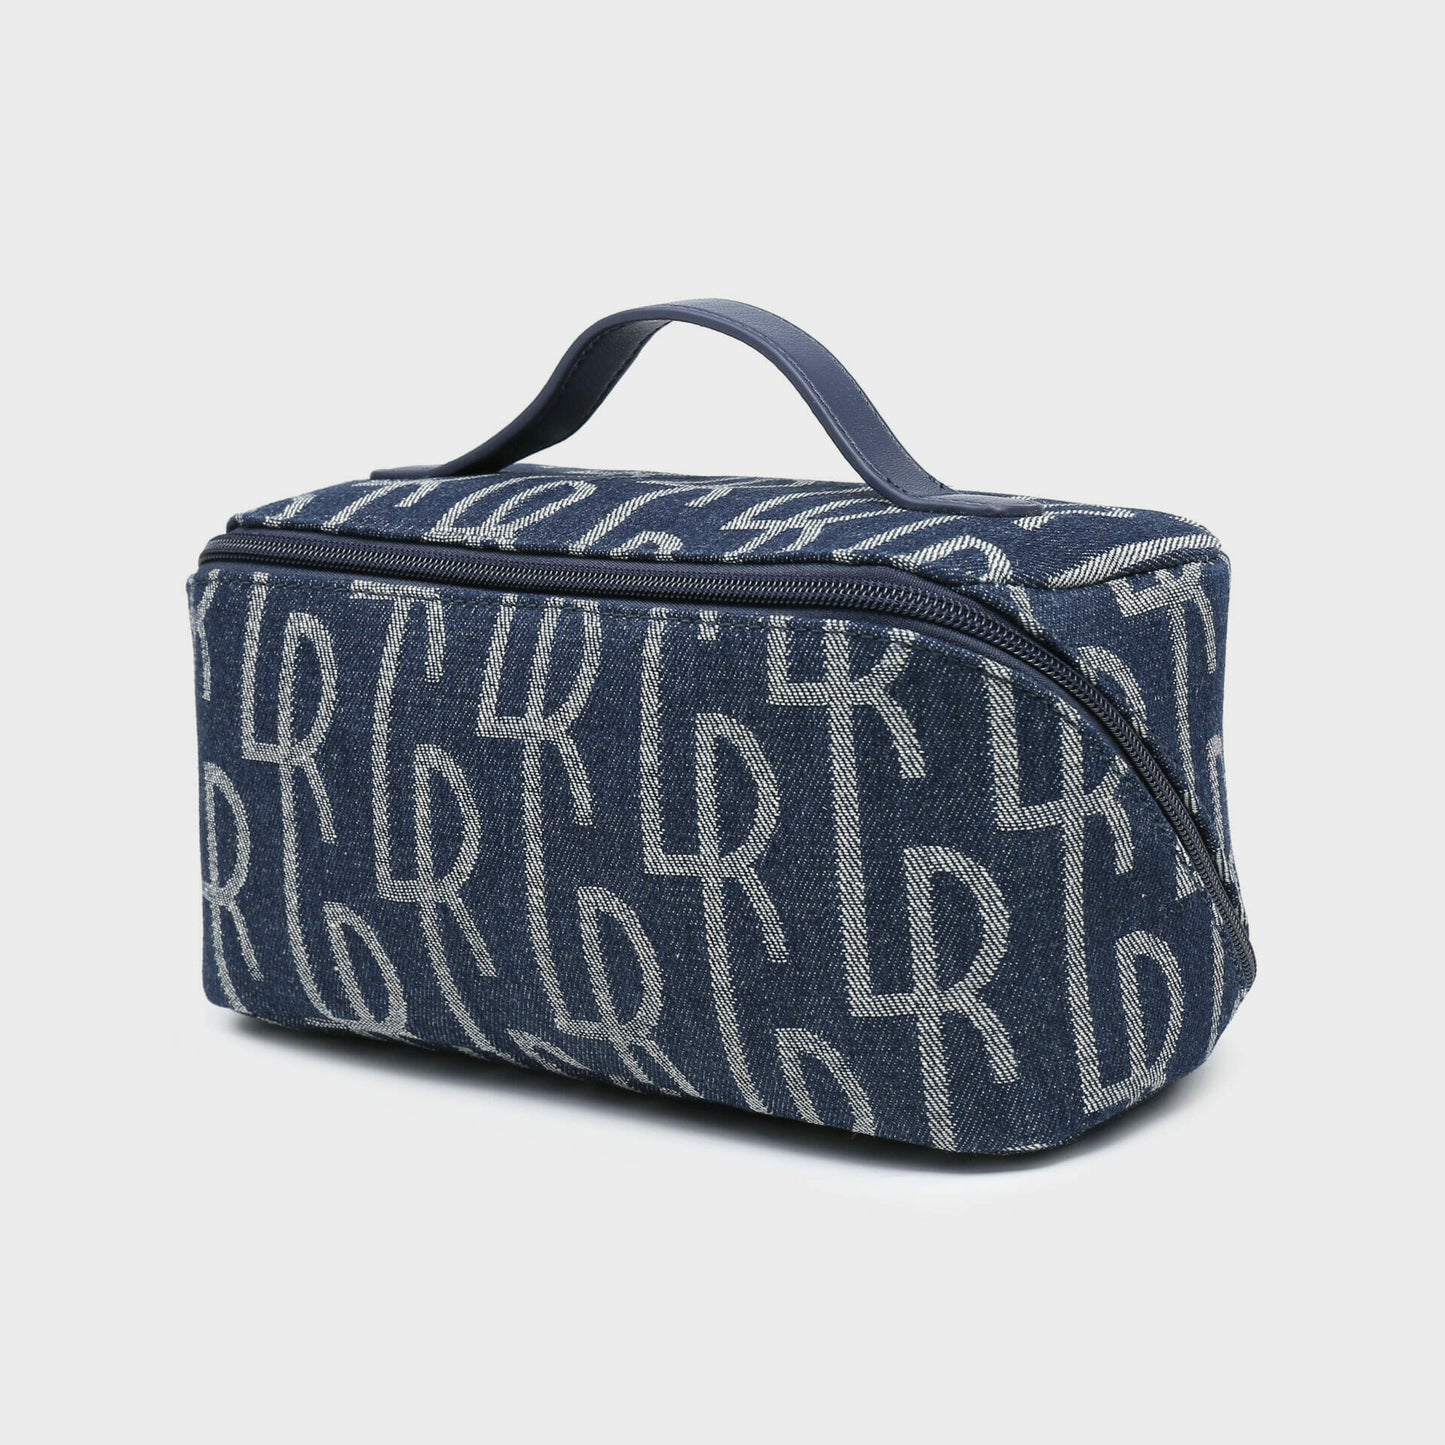 BEAUTY CASE EMBRAYAGES monogramme BLU NOTTE